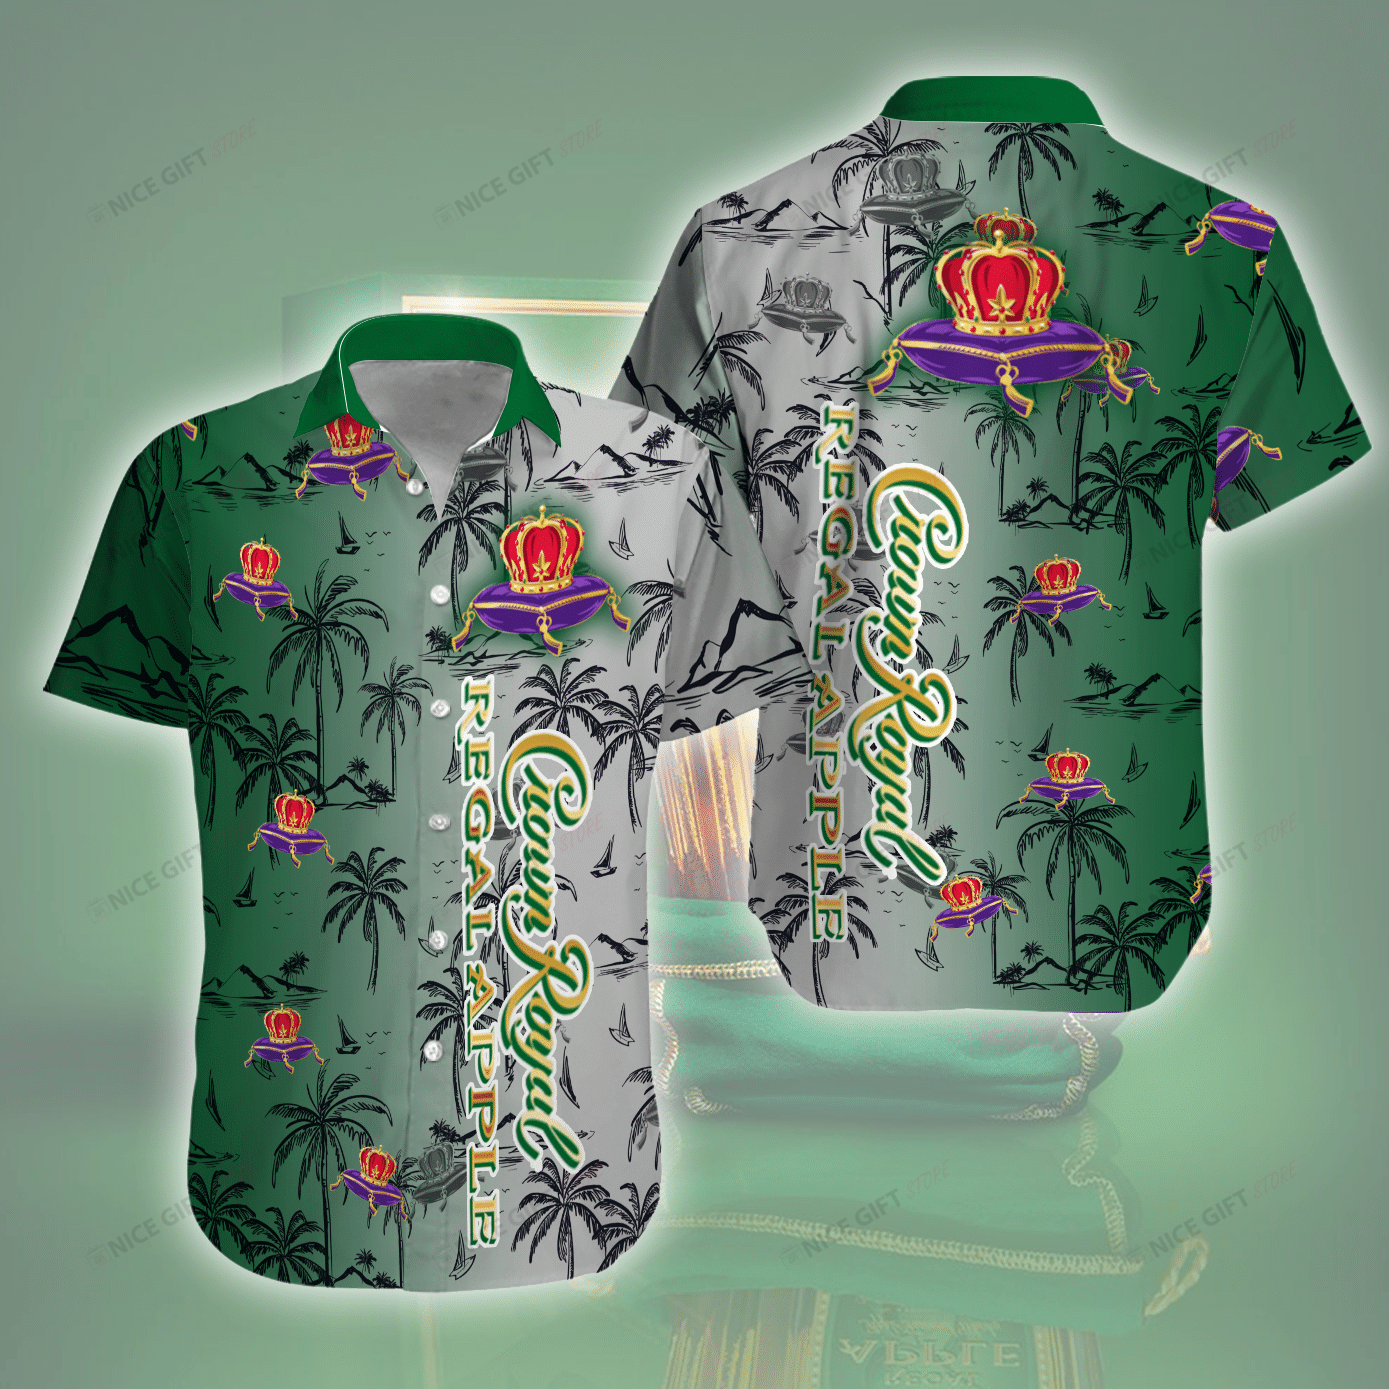 Top Hawaiian Shirt 2022 you'll be happy that you bought them in advance 4